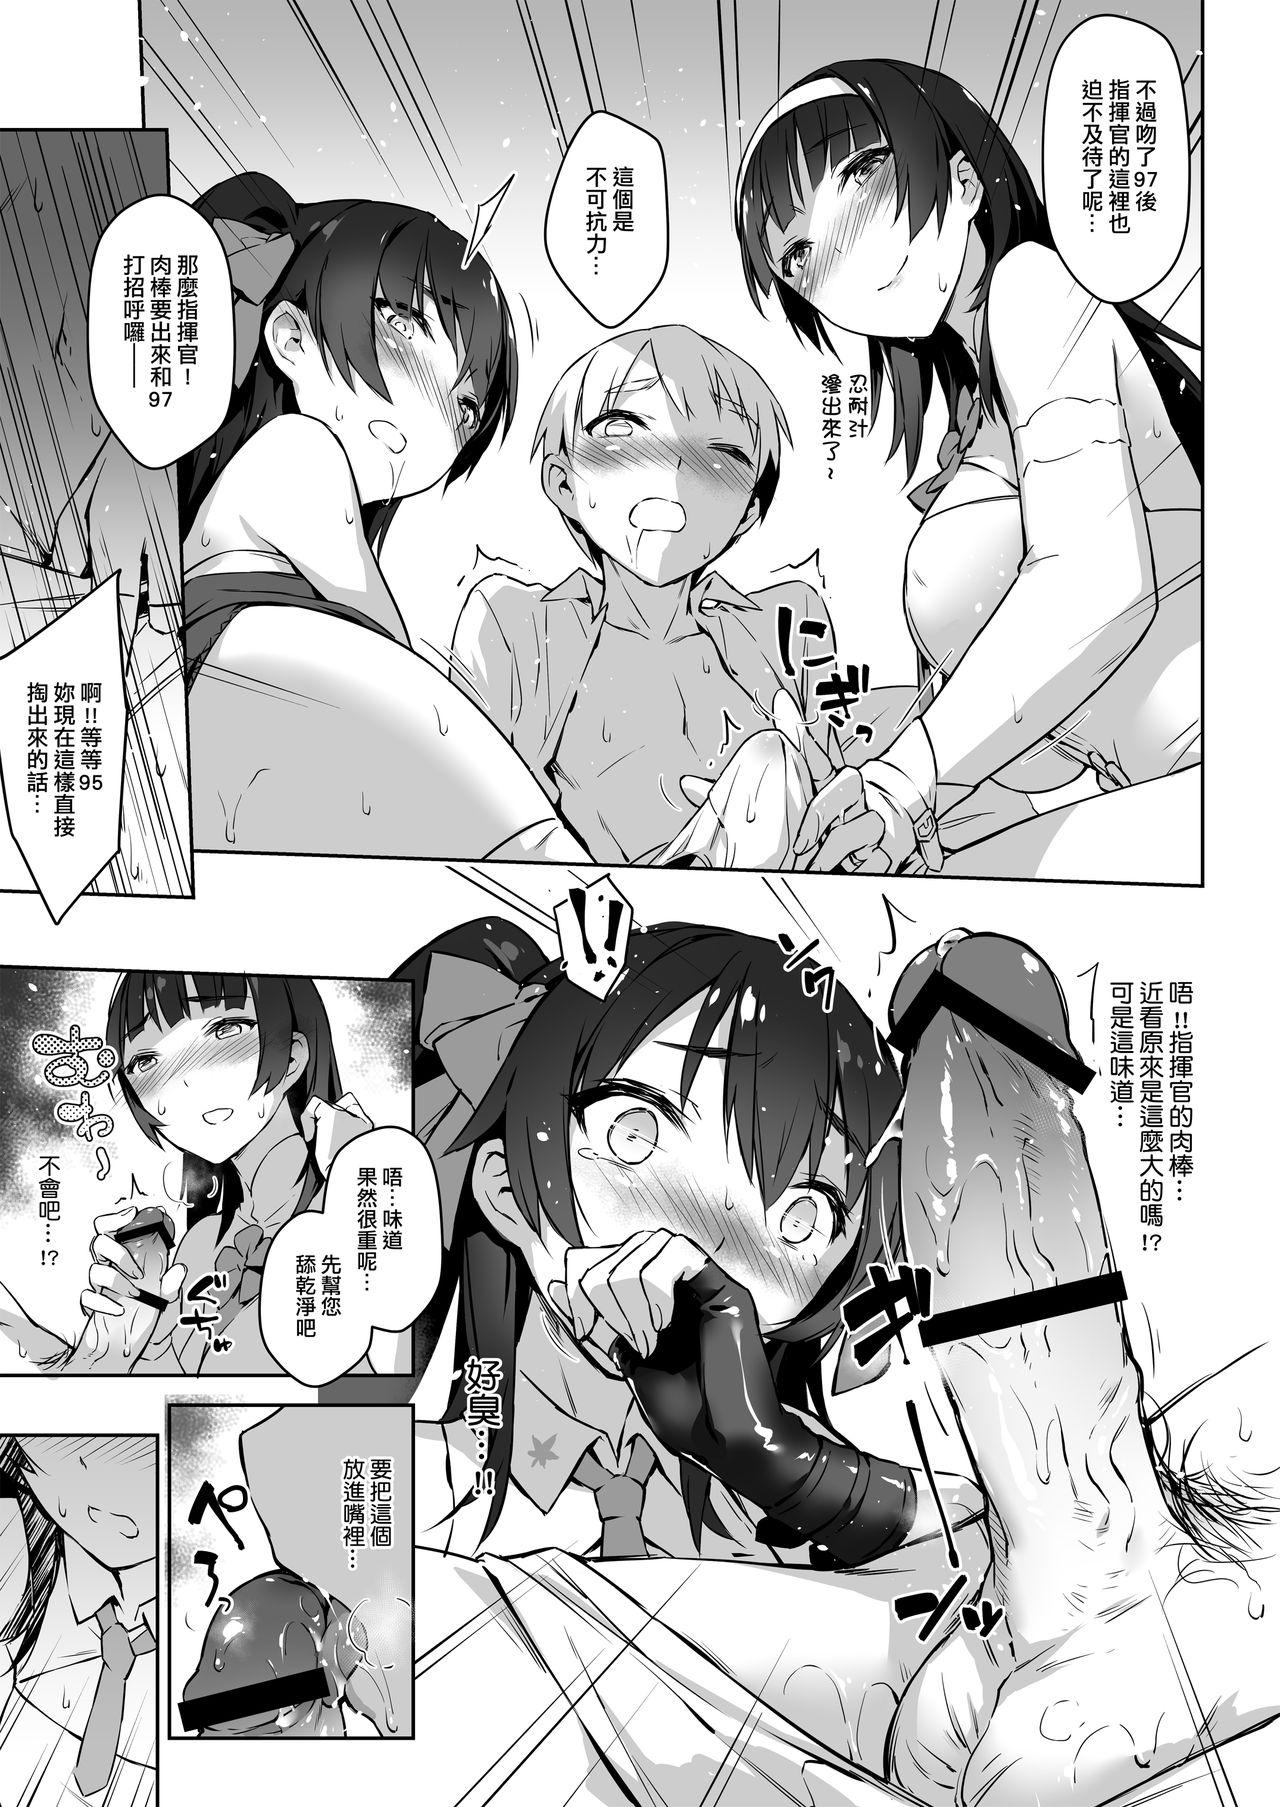 Gay Skinny Type 95 Type 97, Let Sister Teaches You!! - Girls frontline Interracial Sex - Page 11